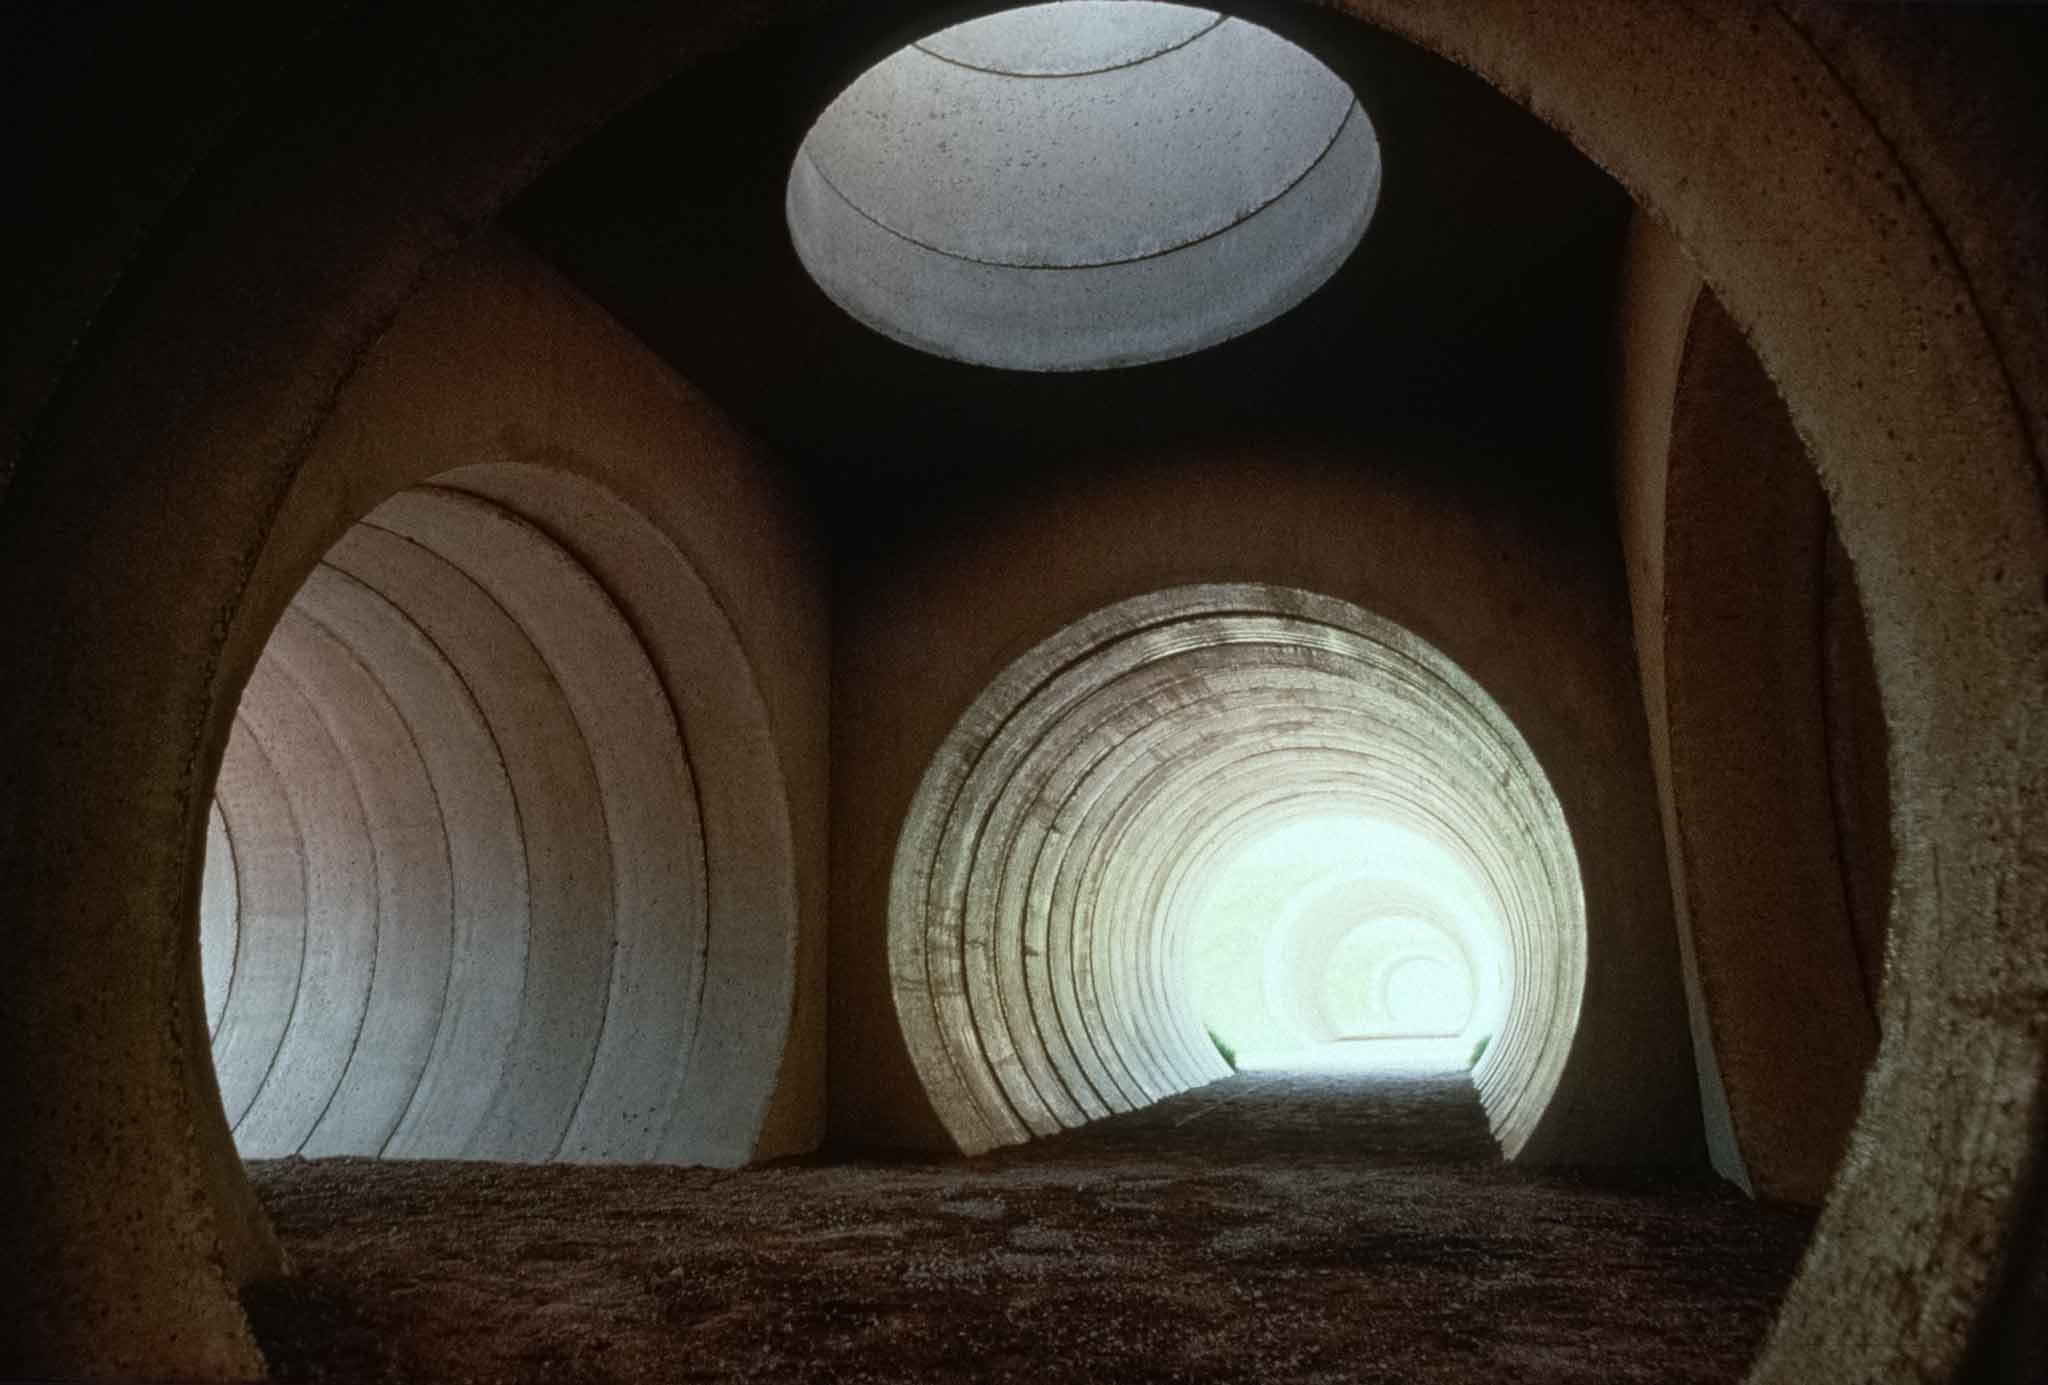 Interior view of converging circular concrete tunnels with light coming through them